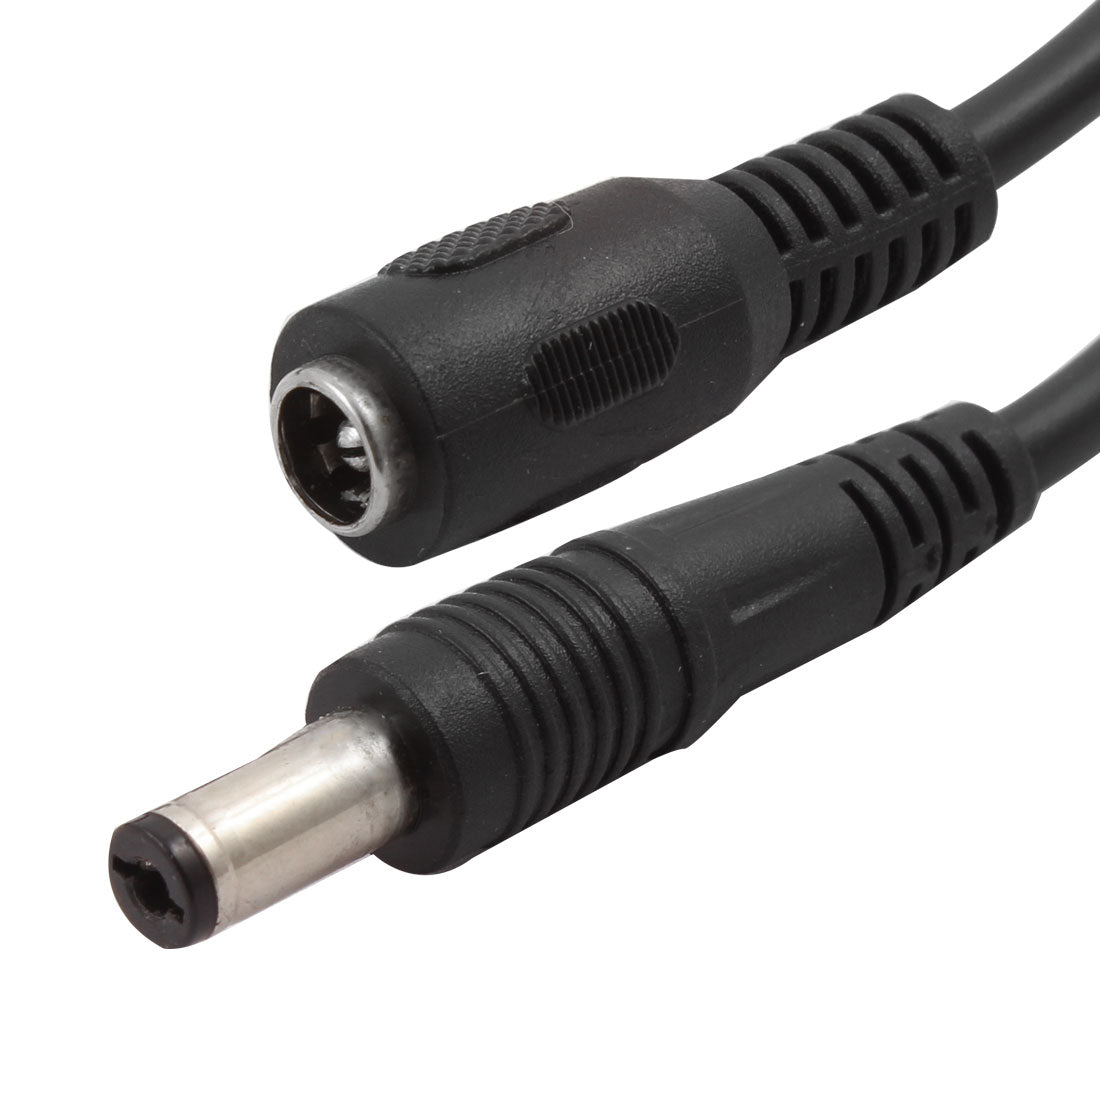 uxcell Uxcell 2.1 x 5.5mm Male to Female DC Power Extension Cable Cord Black 1.5M Length